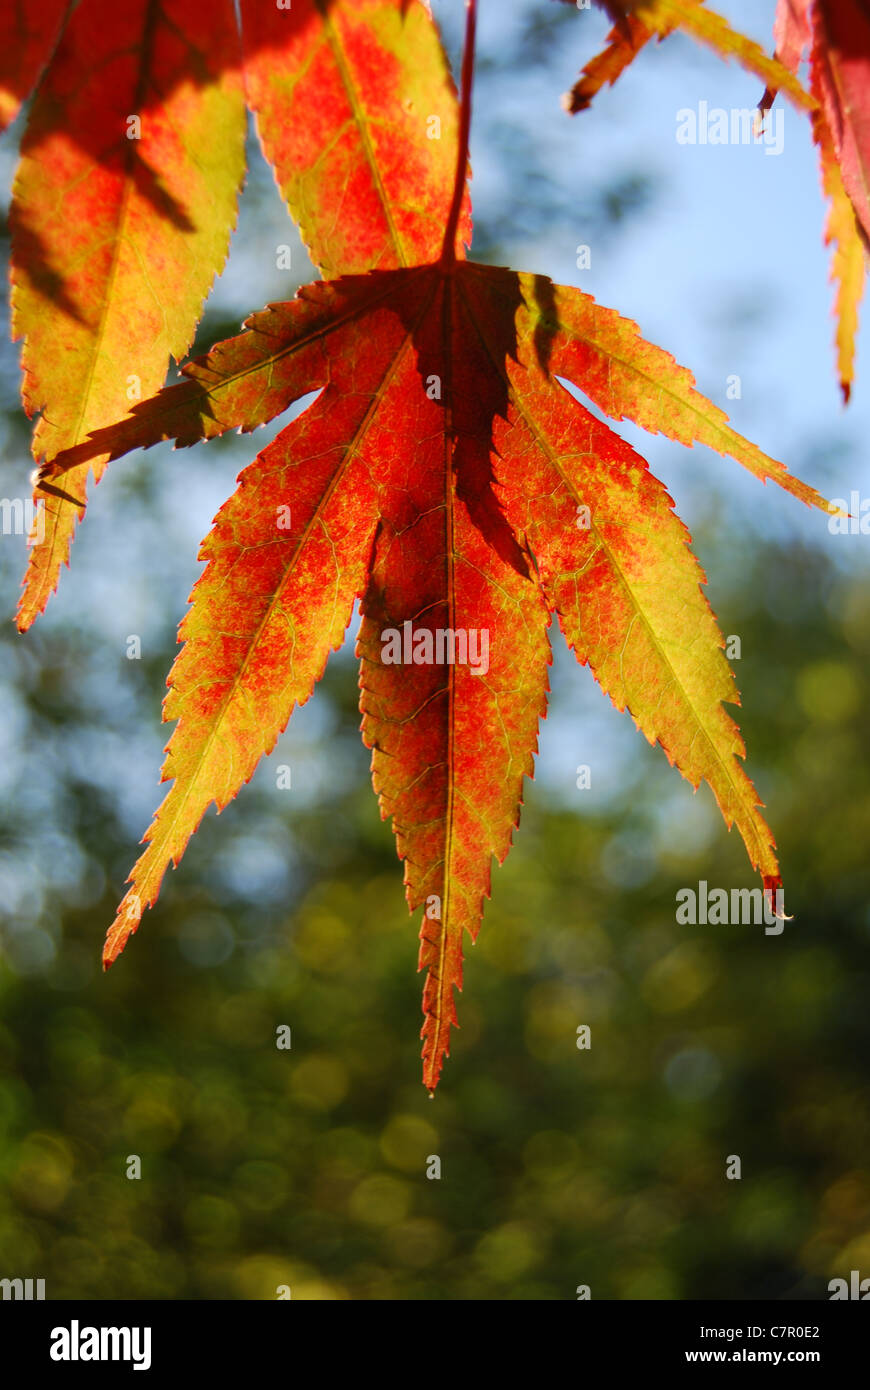 Acer Leaf in autumn Stock Photo